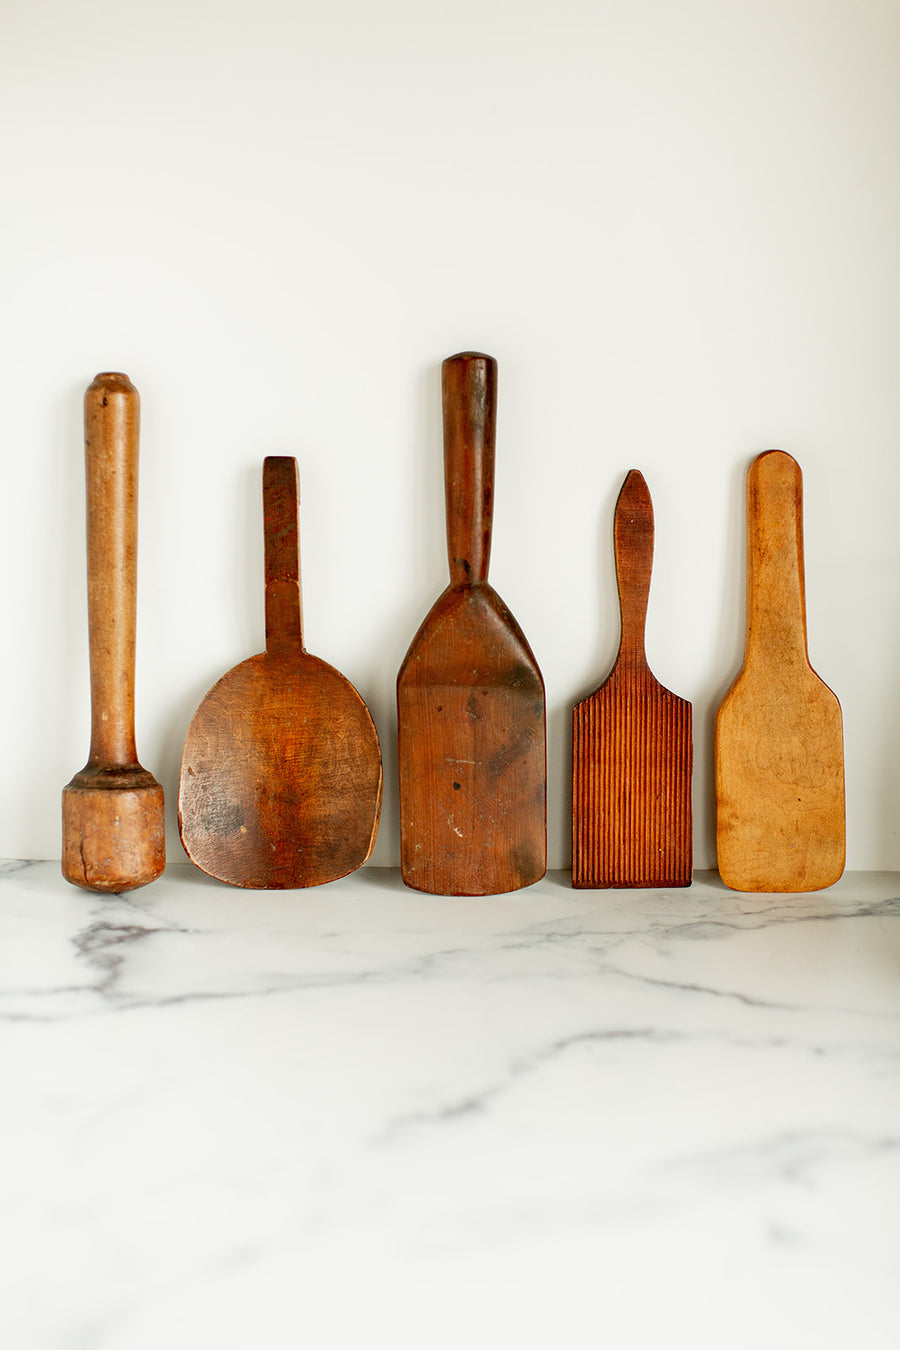 Wooden Cooking Utensils and Tools - Rocky Hedge Farm